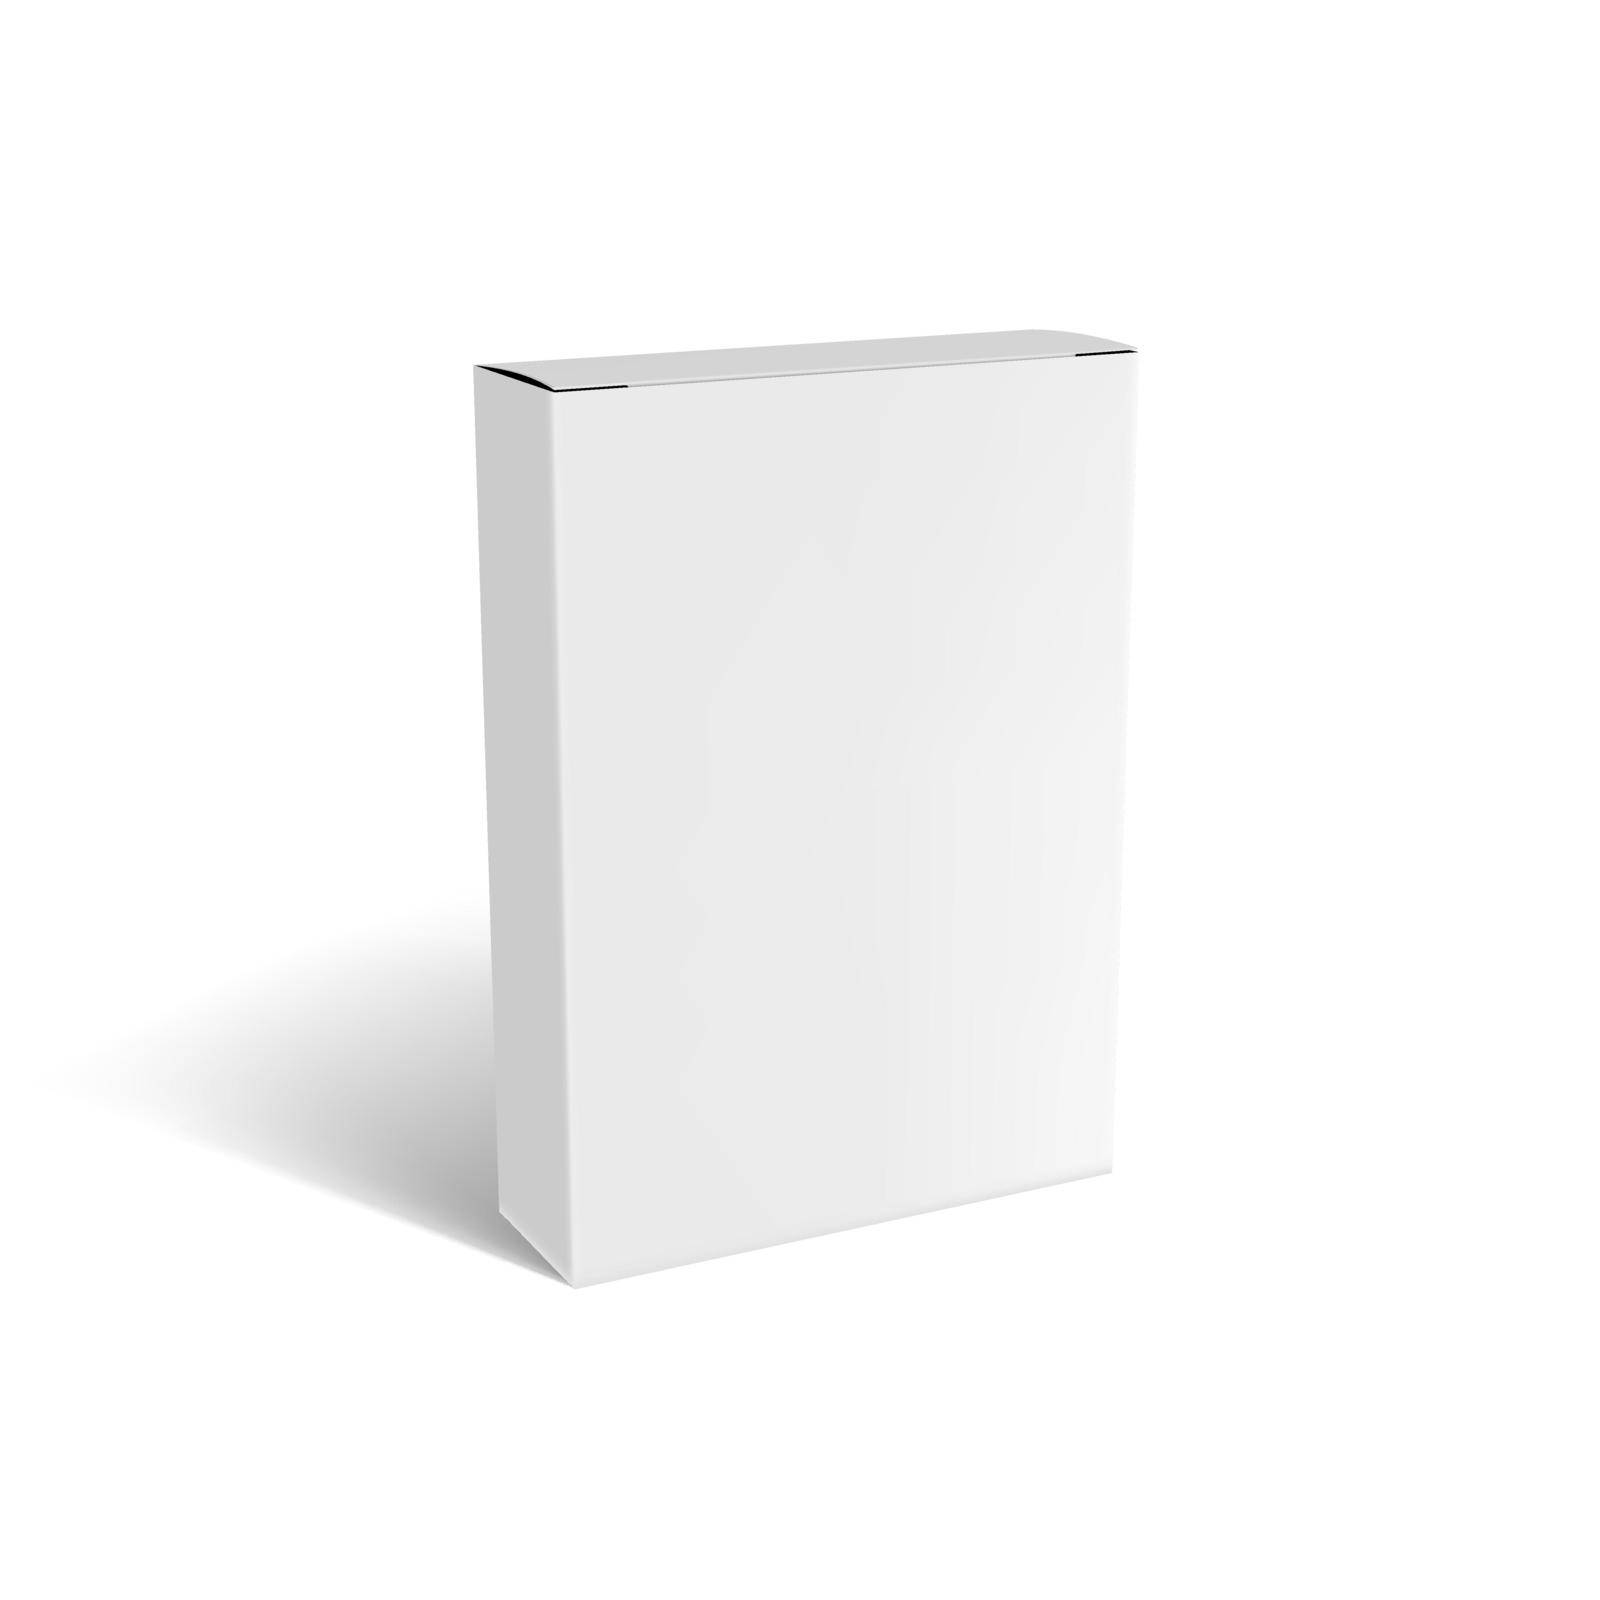 3D White Box Mock Up Packiging With Shadow. EPS10 Vector